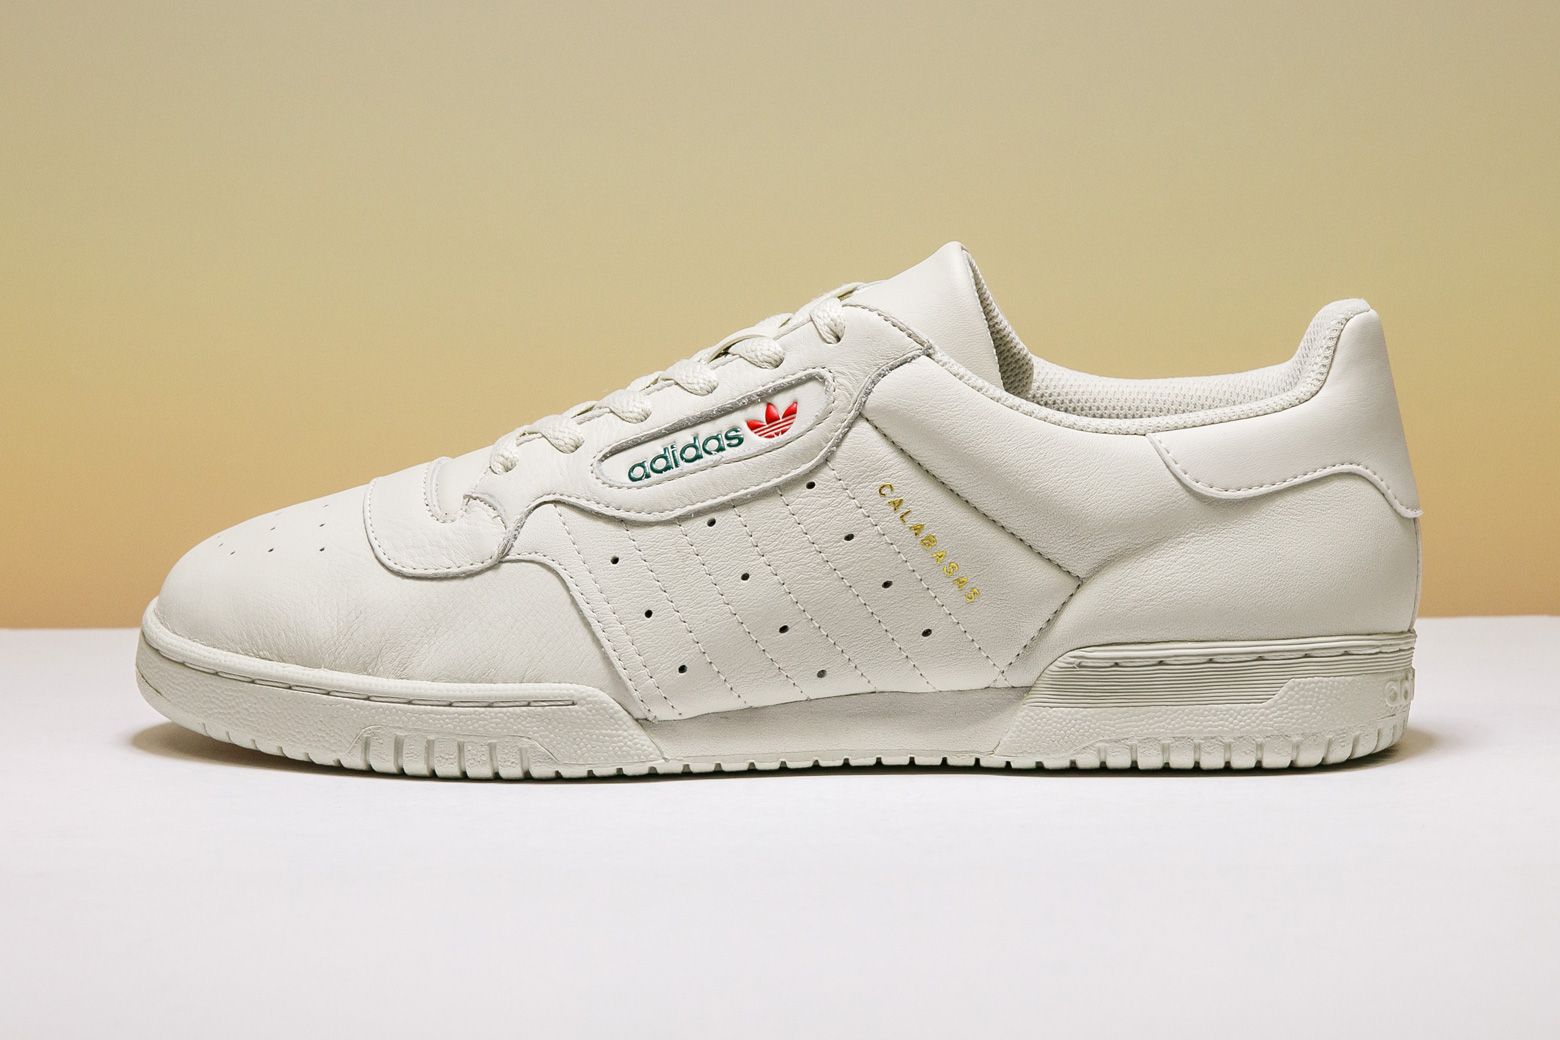 Honorable Nutrición Pío Stadium Goods on Twitter: "The adidas Yeezy Powerphase "Calabasas" brings  the vintage Powerphase model into a new age. https://t.co/Bv3WWuvC0j  https://t.co/3BGuca4nm7" / Twitter